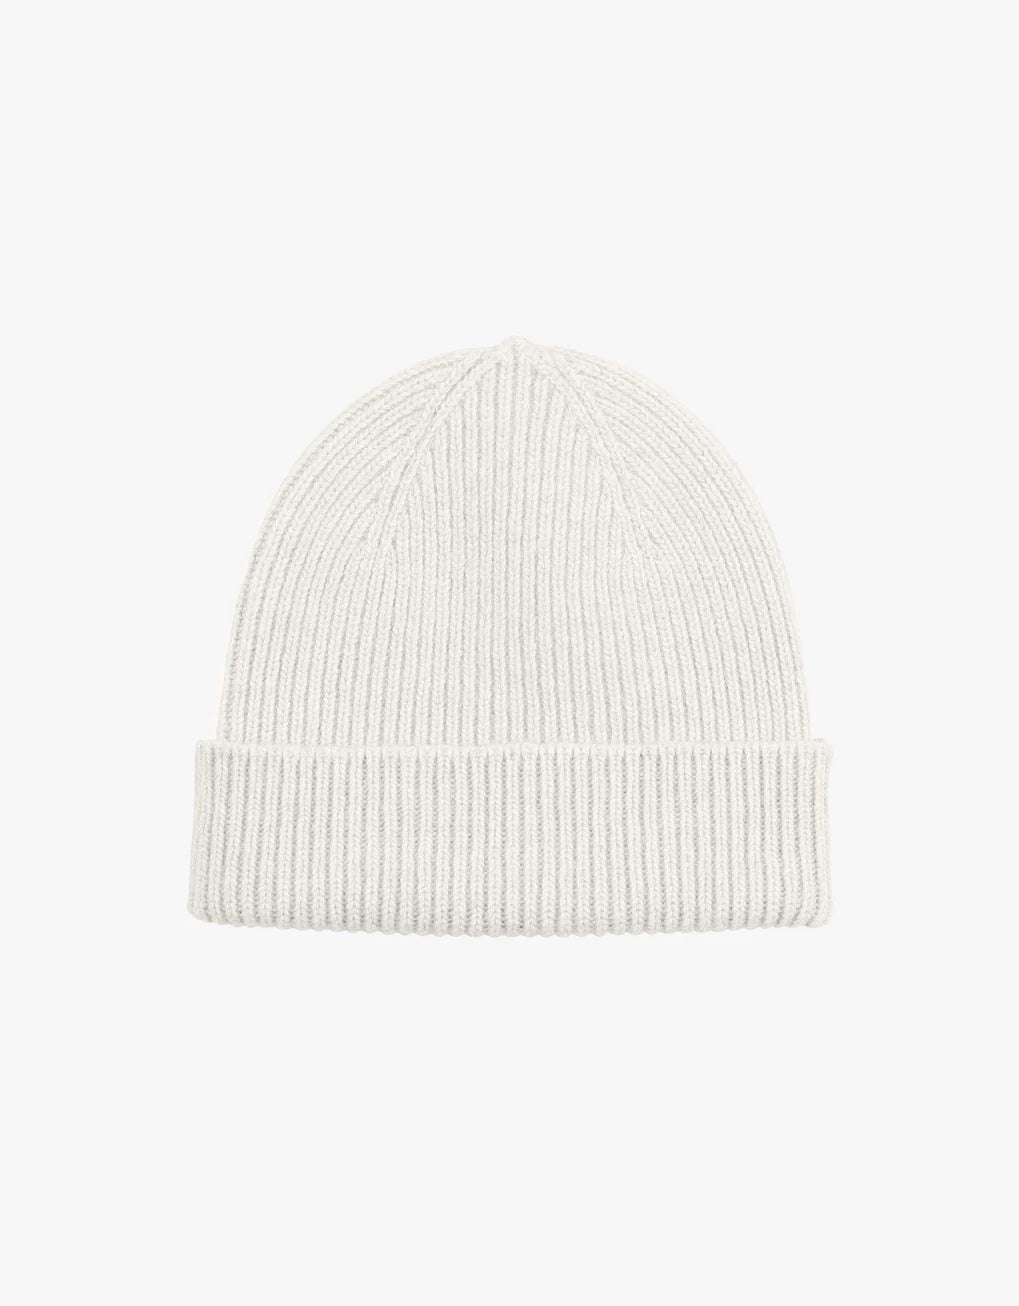 A Merino Wool Beanie by Colorful Standard on a white background.